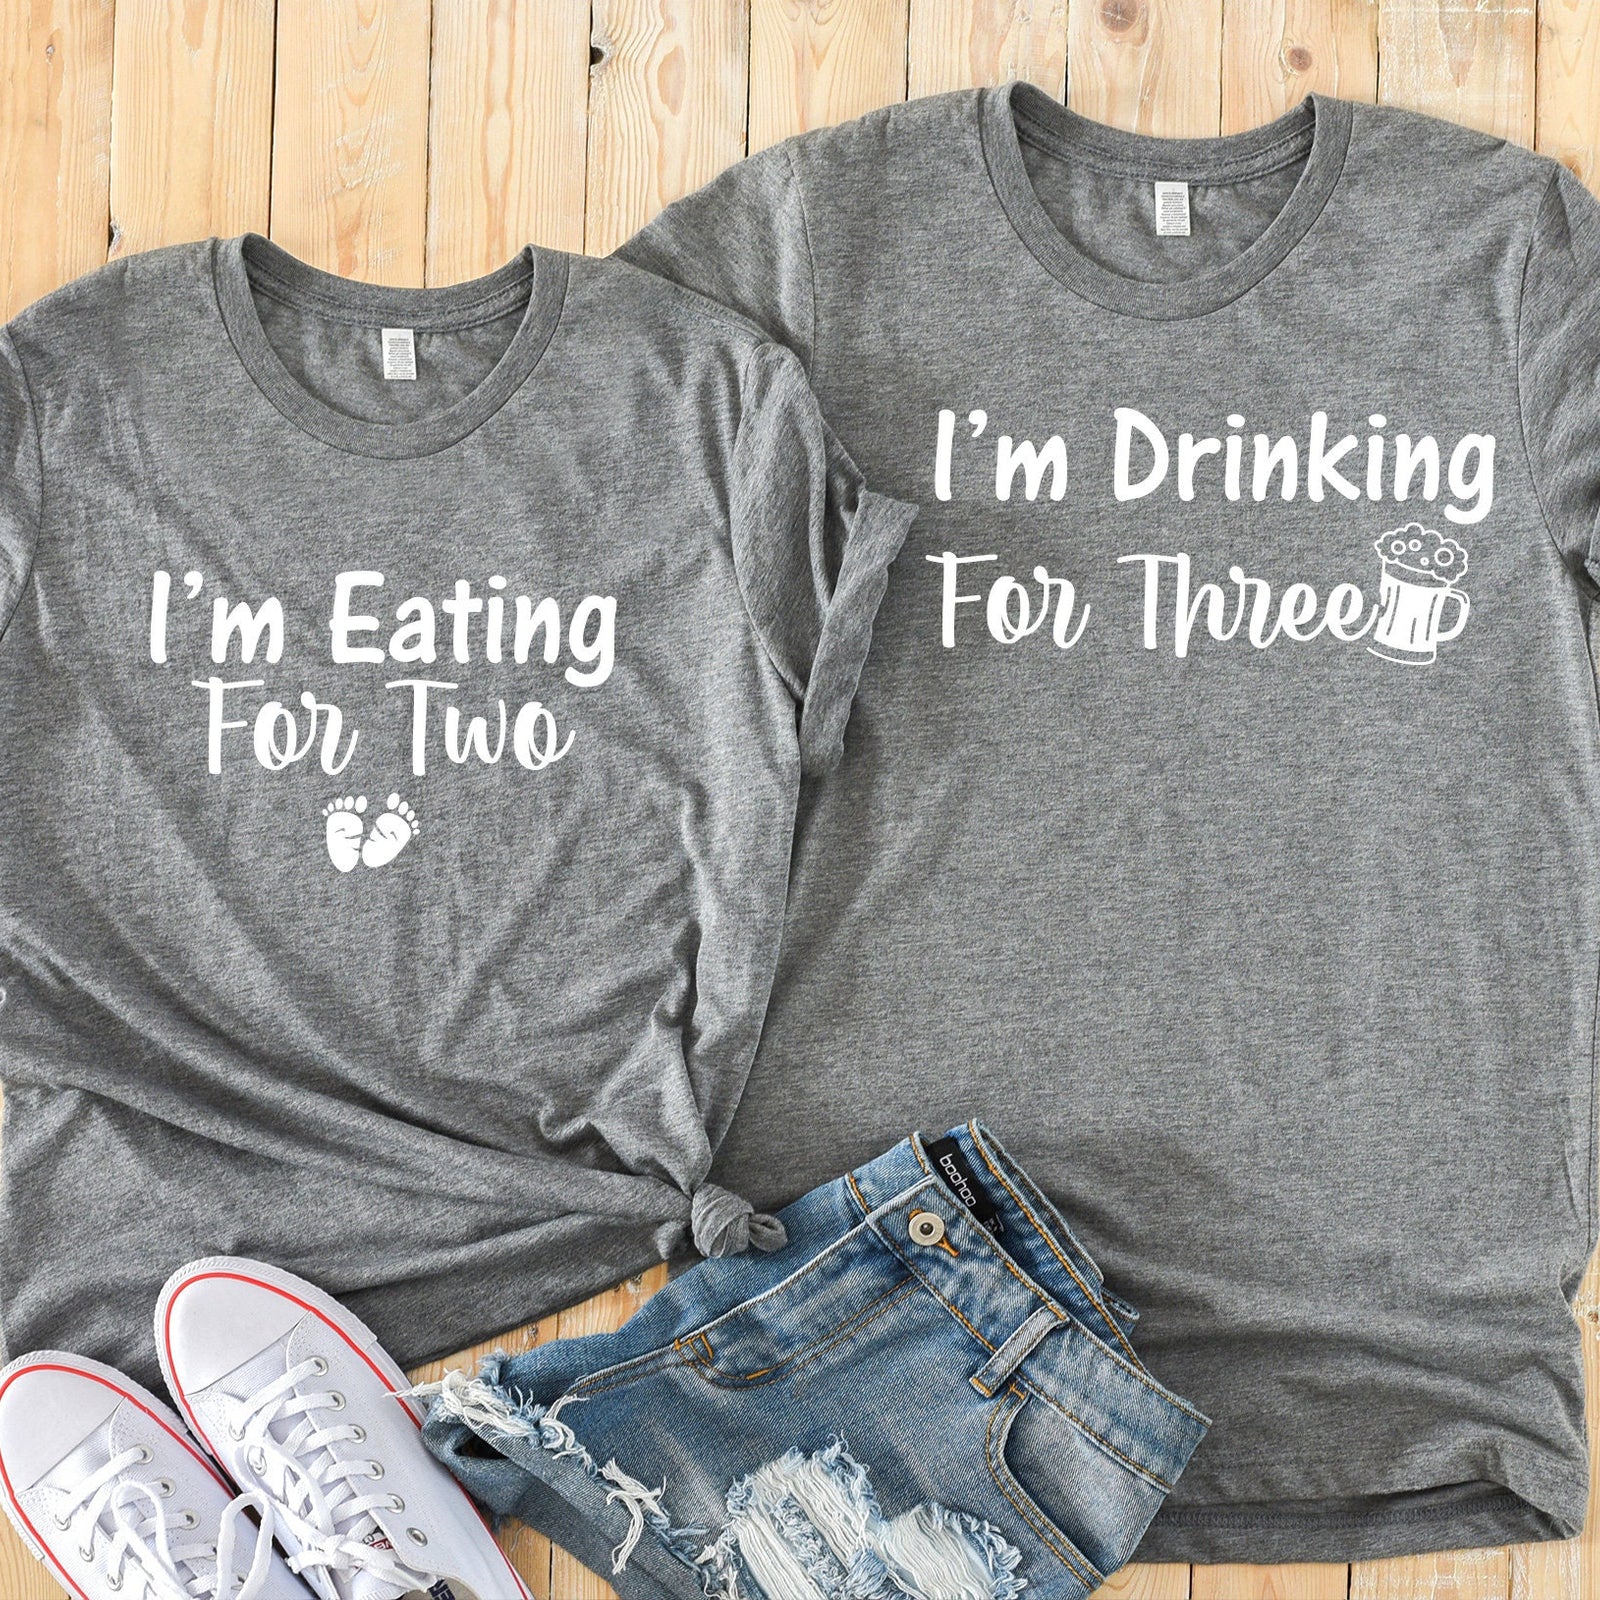 I'm Eating for Two and I'm Drinking for Three T Shirts - Cute